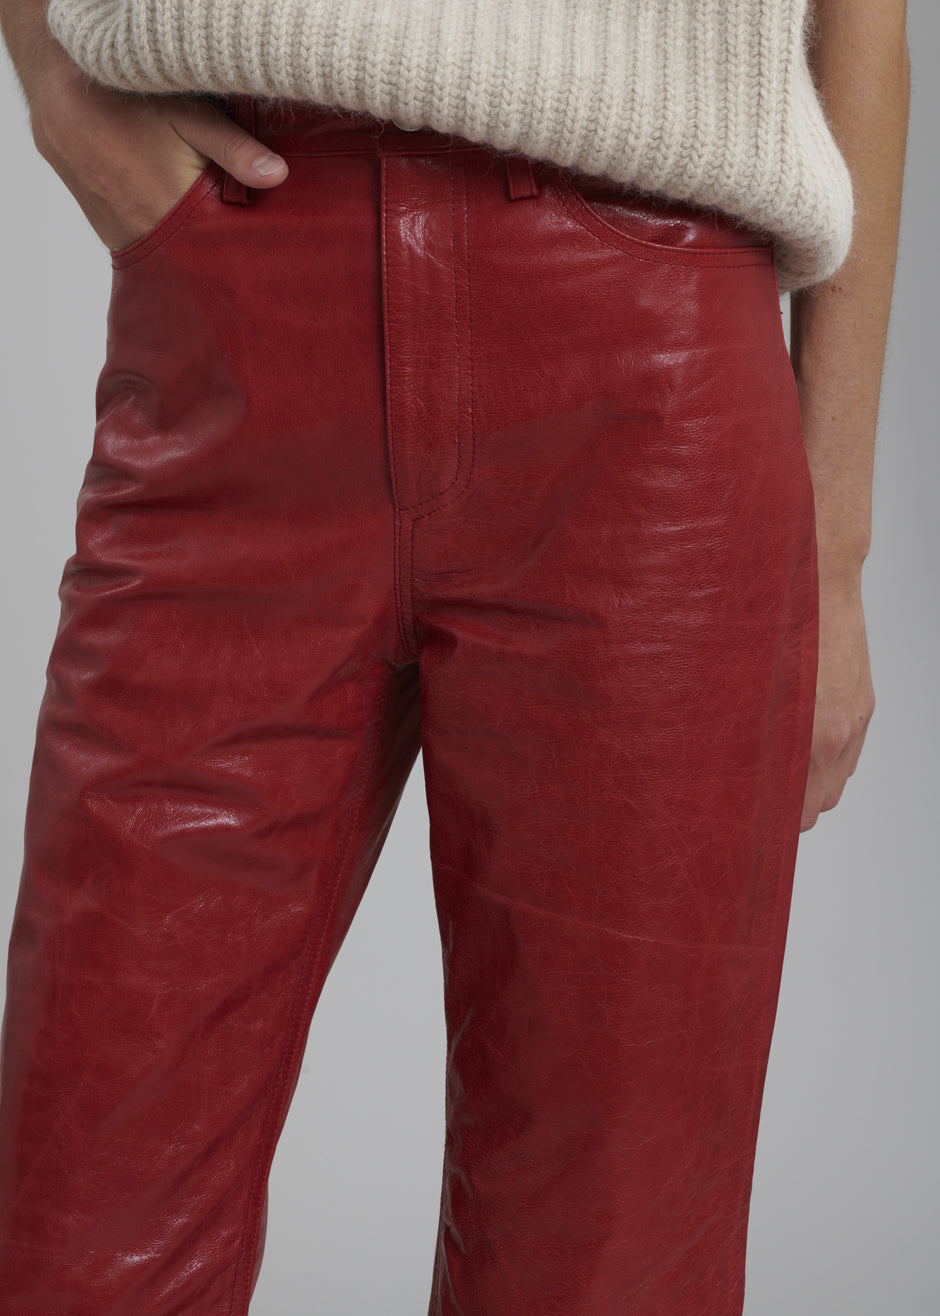 REMAIN Pants Crunchy Leather - Chili Pepper - 7